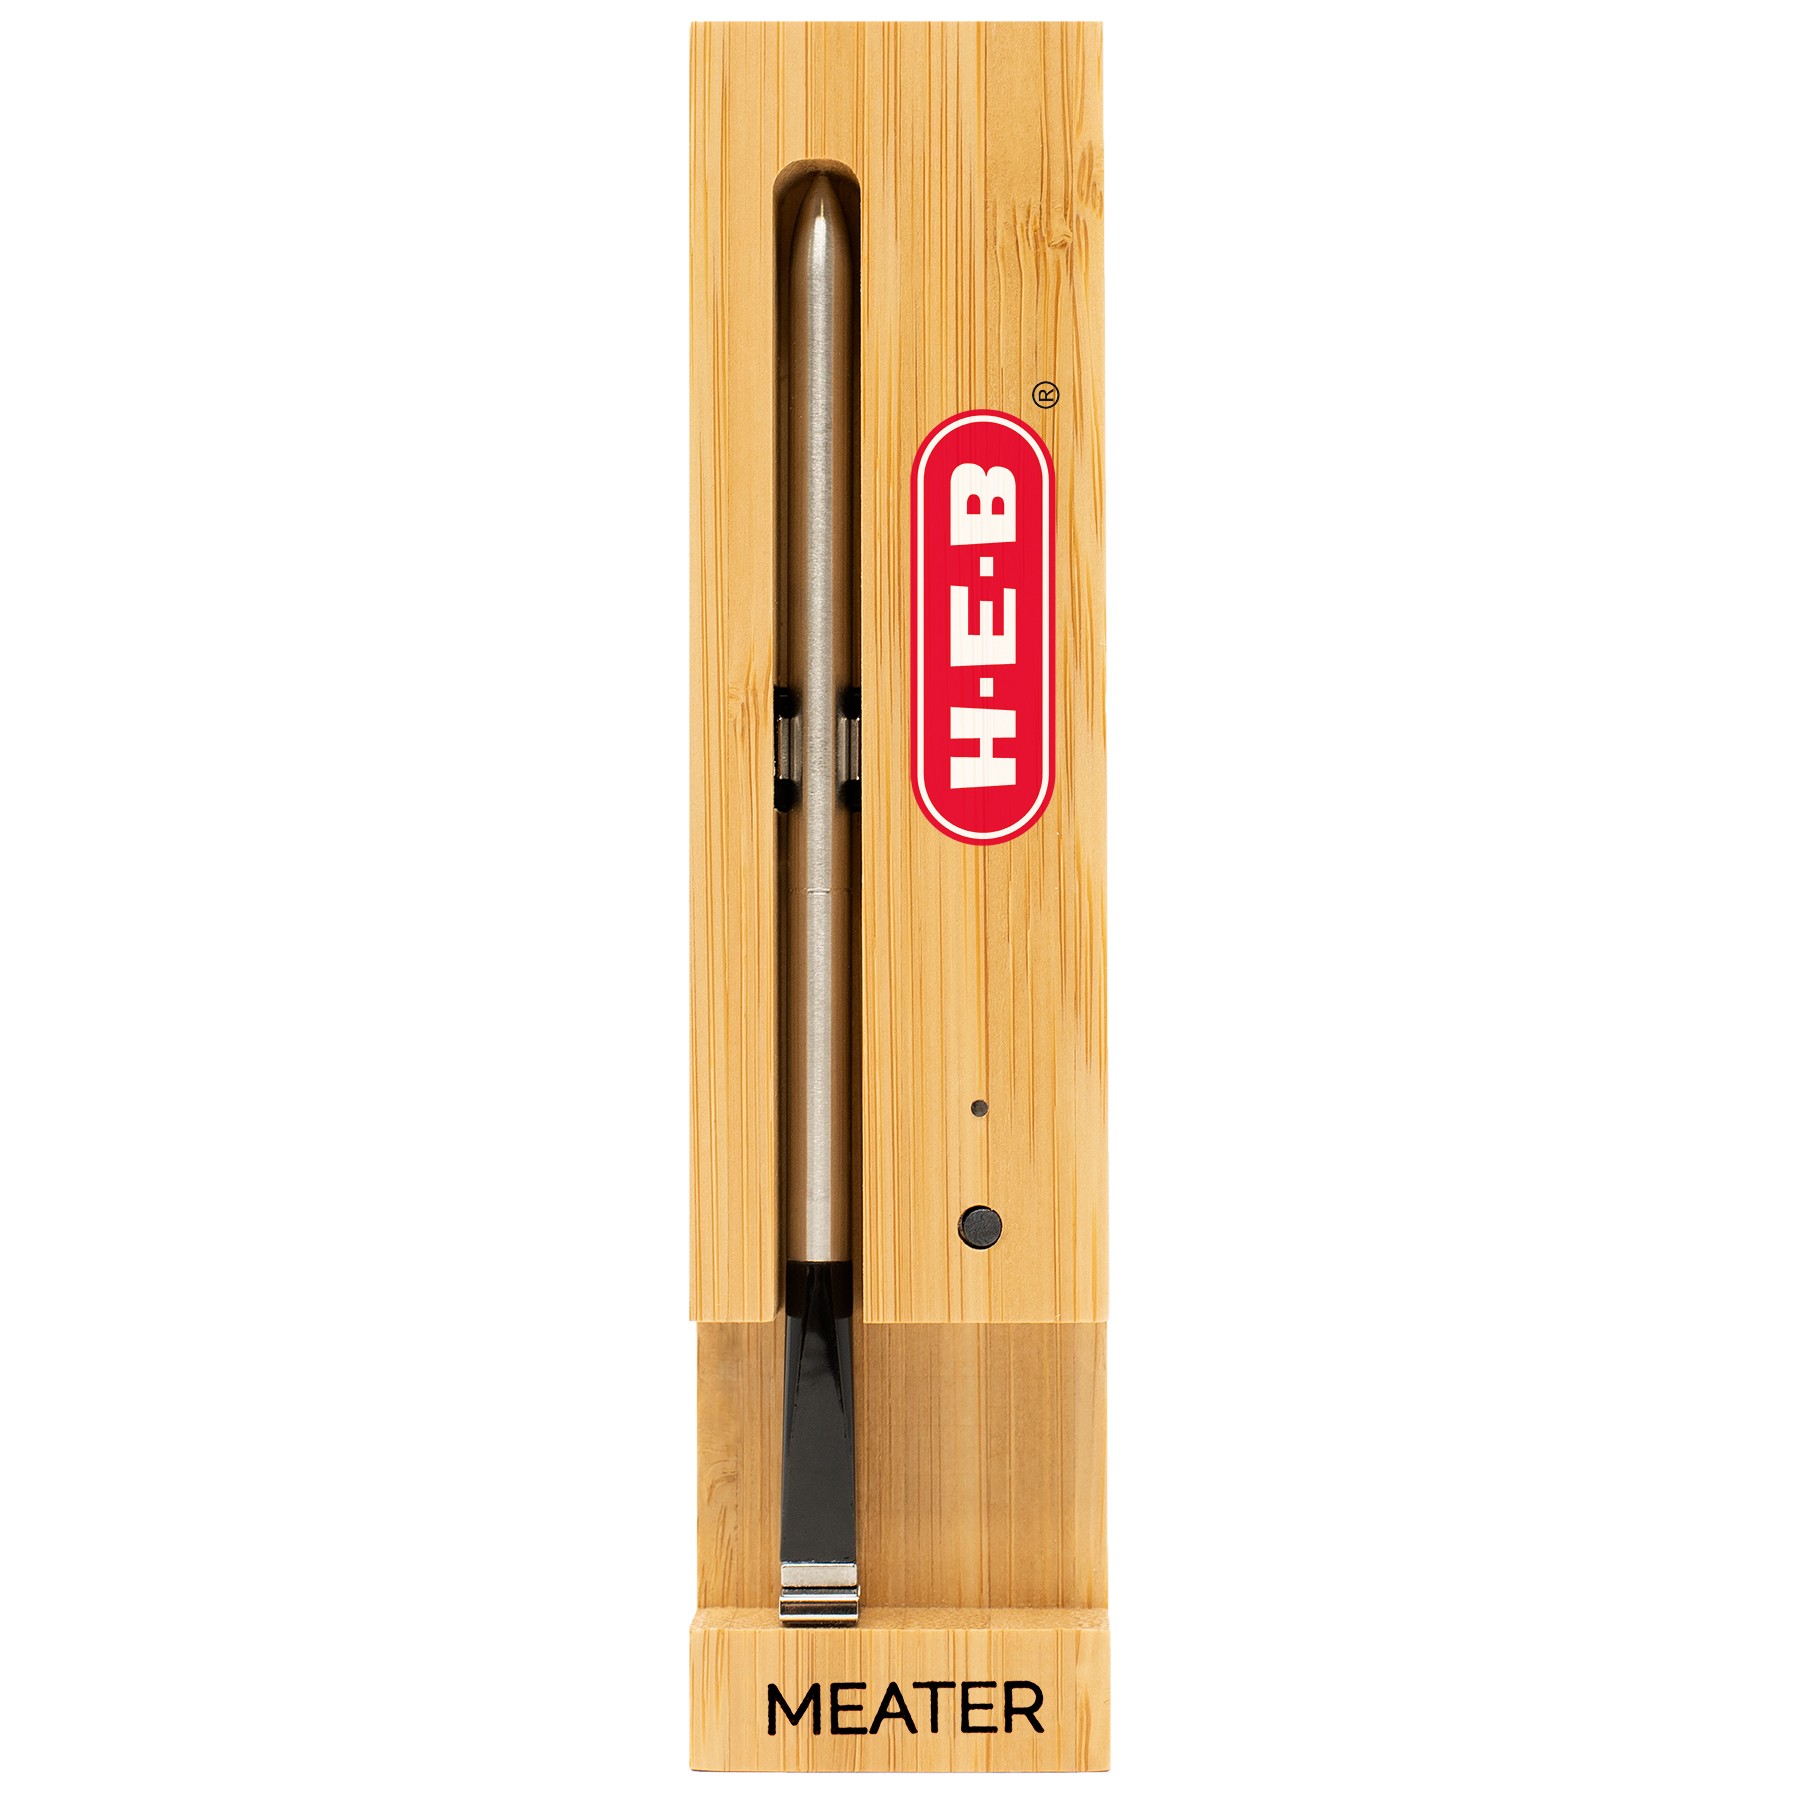 Smart Meat Thermometer from Greco